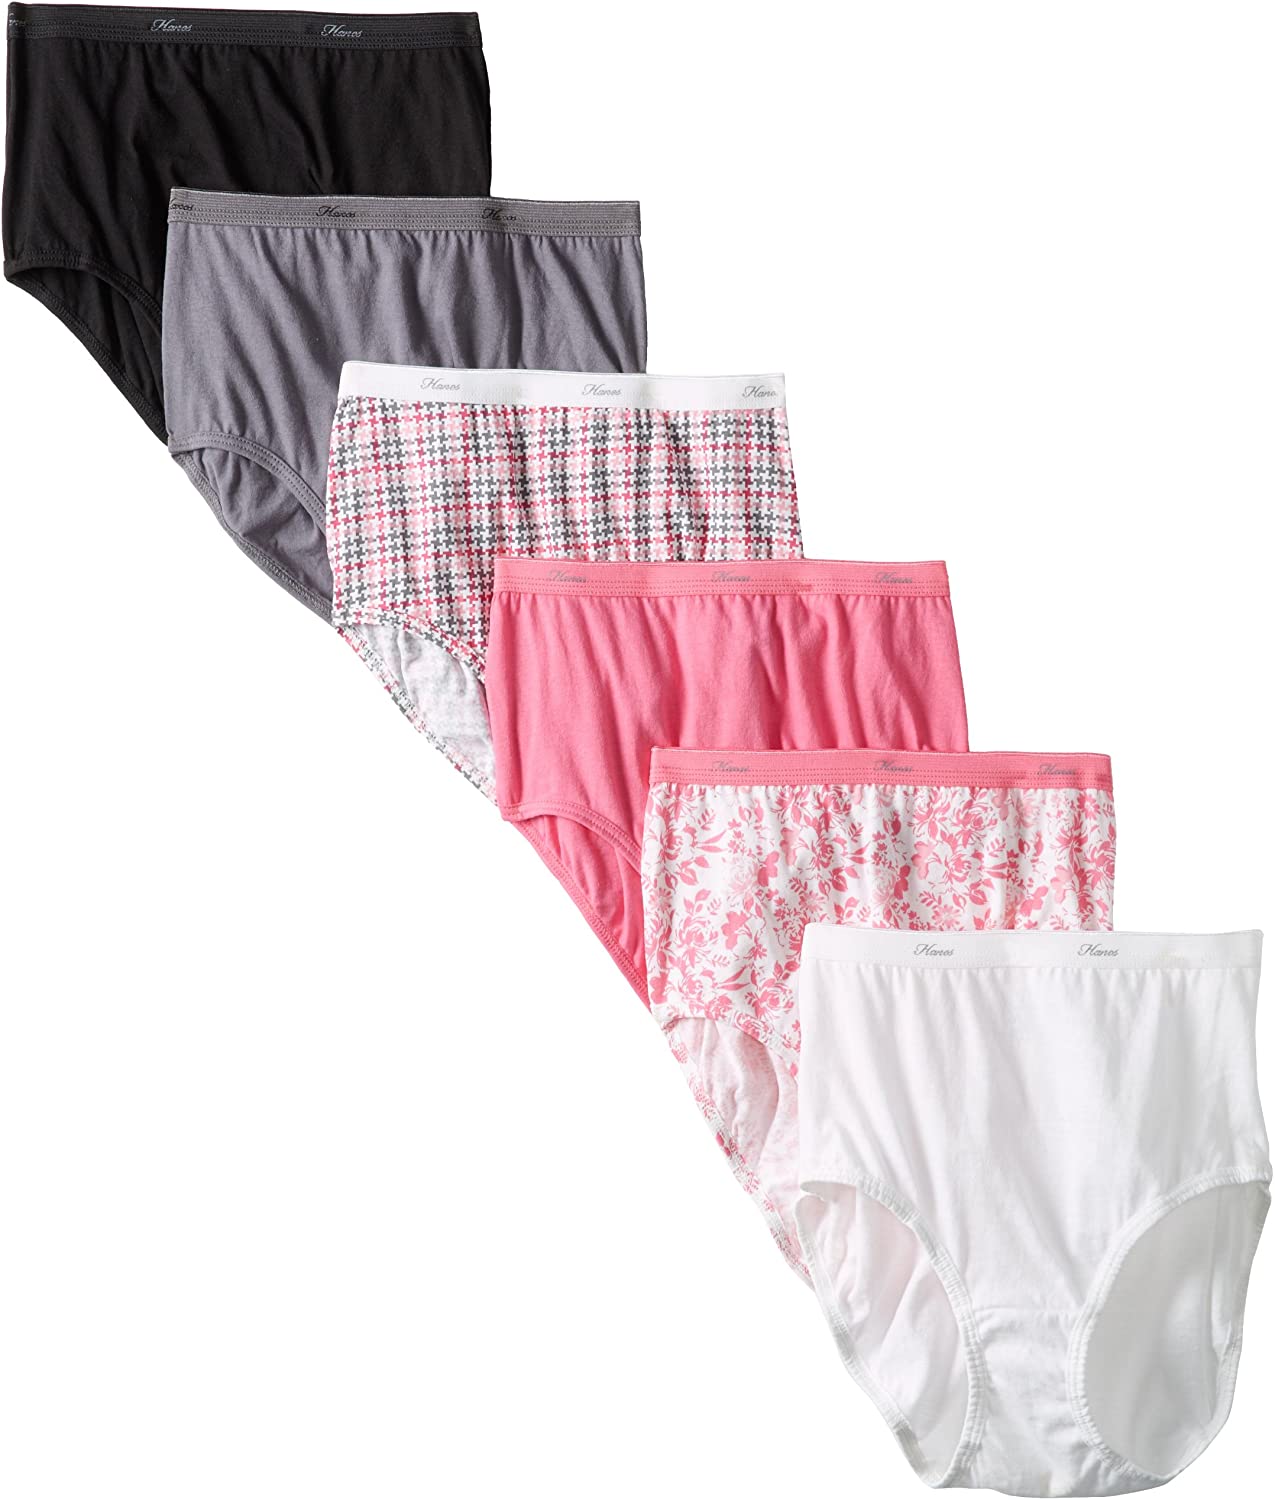 TV30P5 - Hanes Girls` Ultimate TAGLESS Cotton Stretch 5-Pack